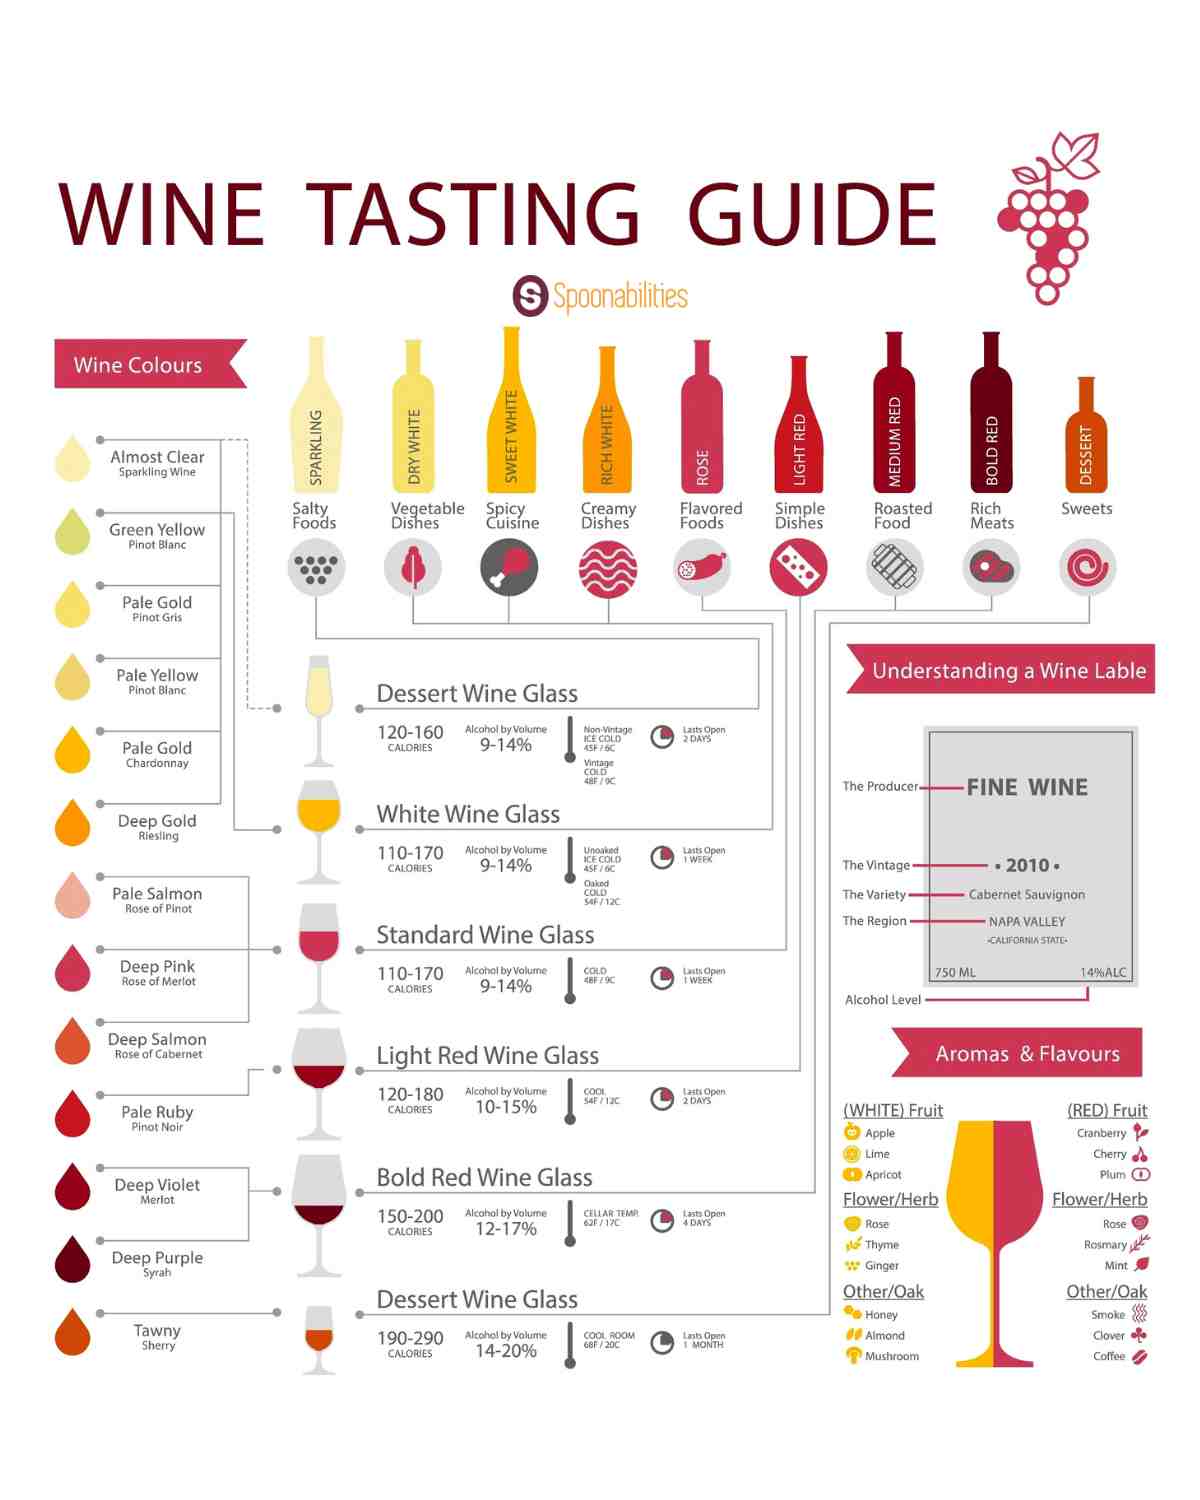 Wine tasting guide infographic with wine pairing recommendations